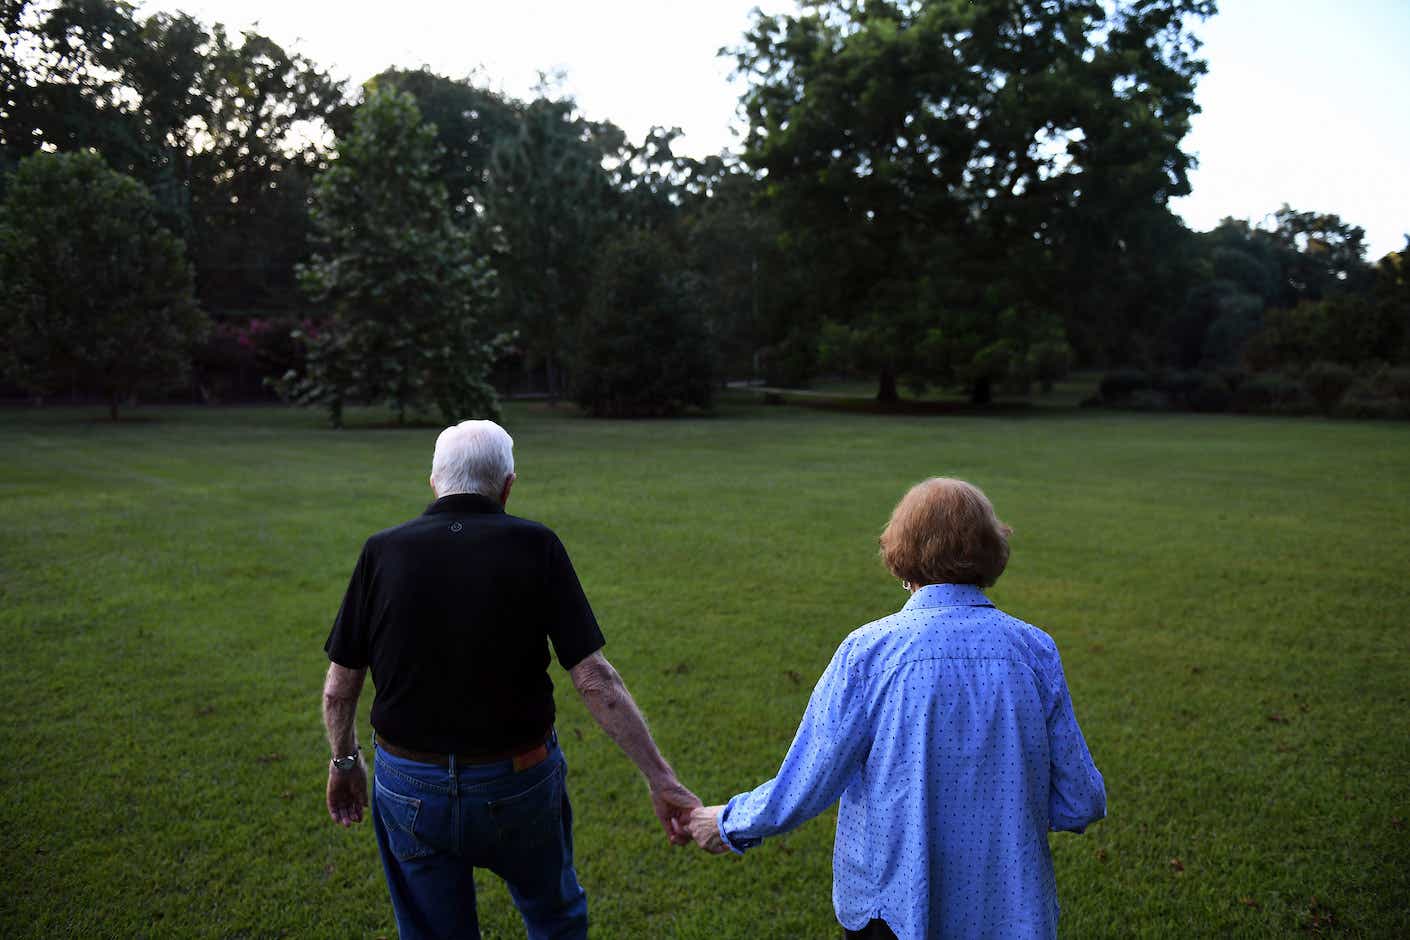 former President of the United States, Jimmy Carter walks with his wife, former First Lady, Rosalynn Carter towards their home following dinner at a friend's home on Saturday August 04, 2018 in Plains, GA